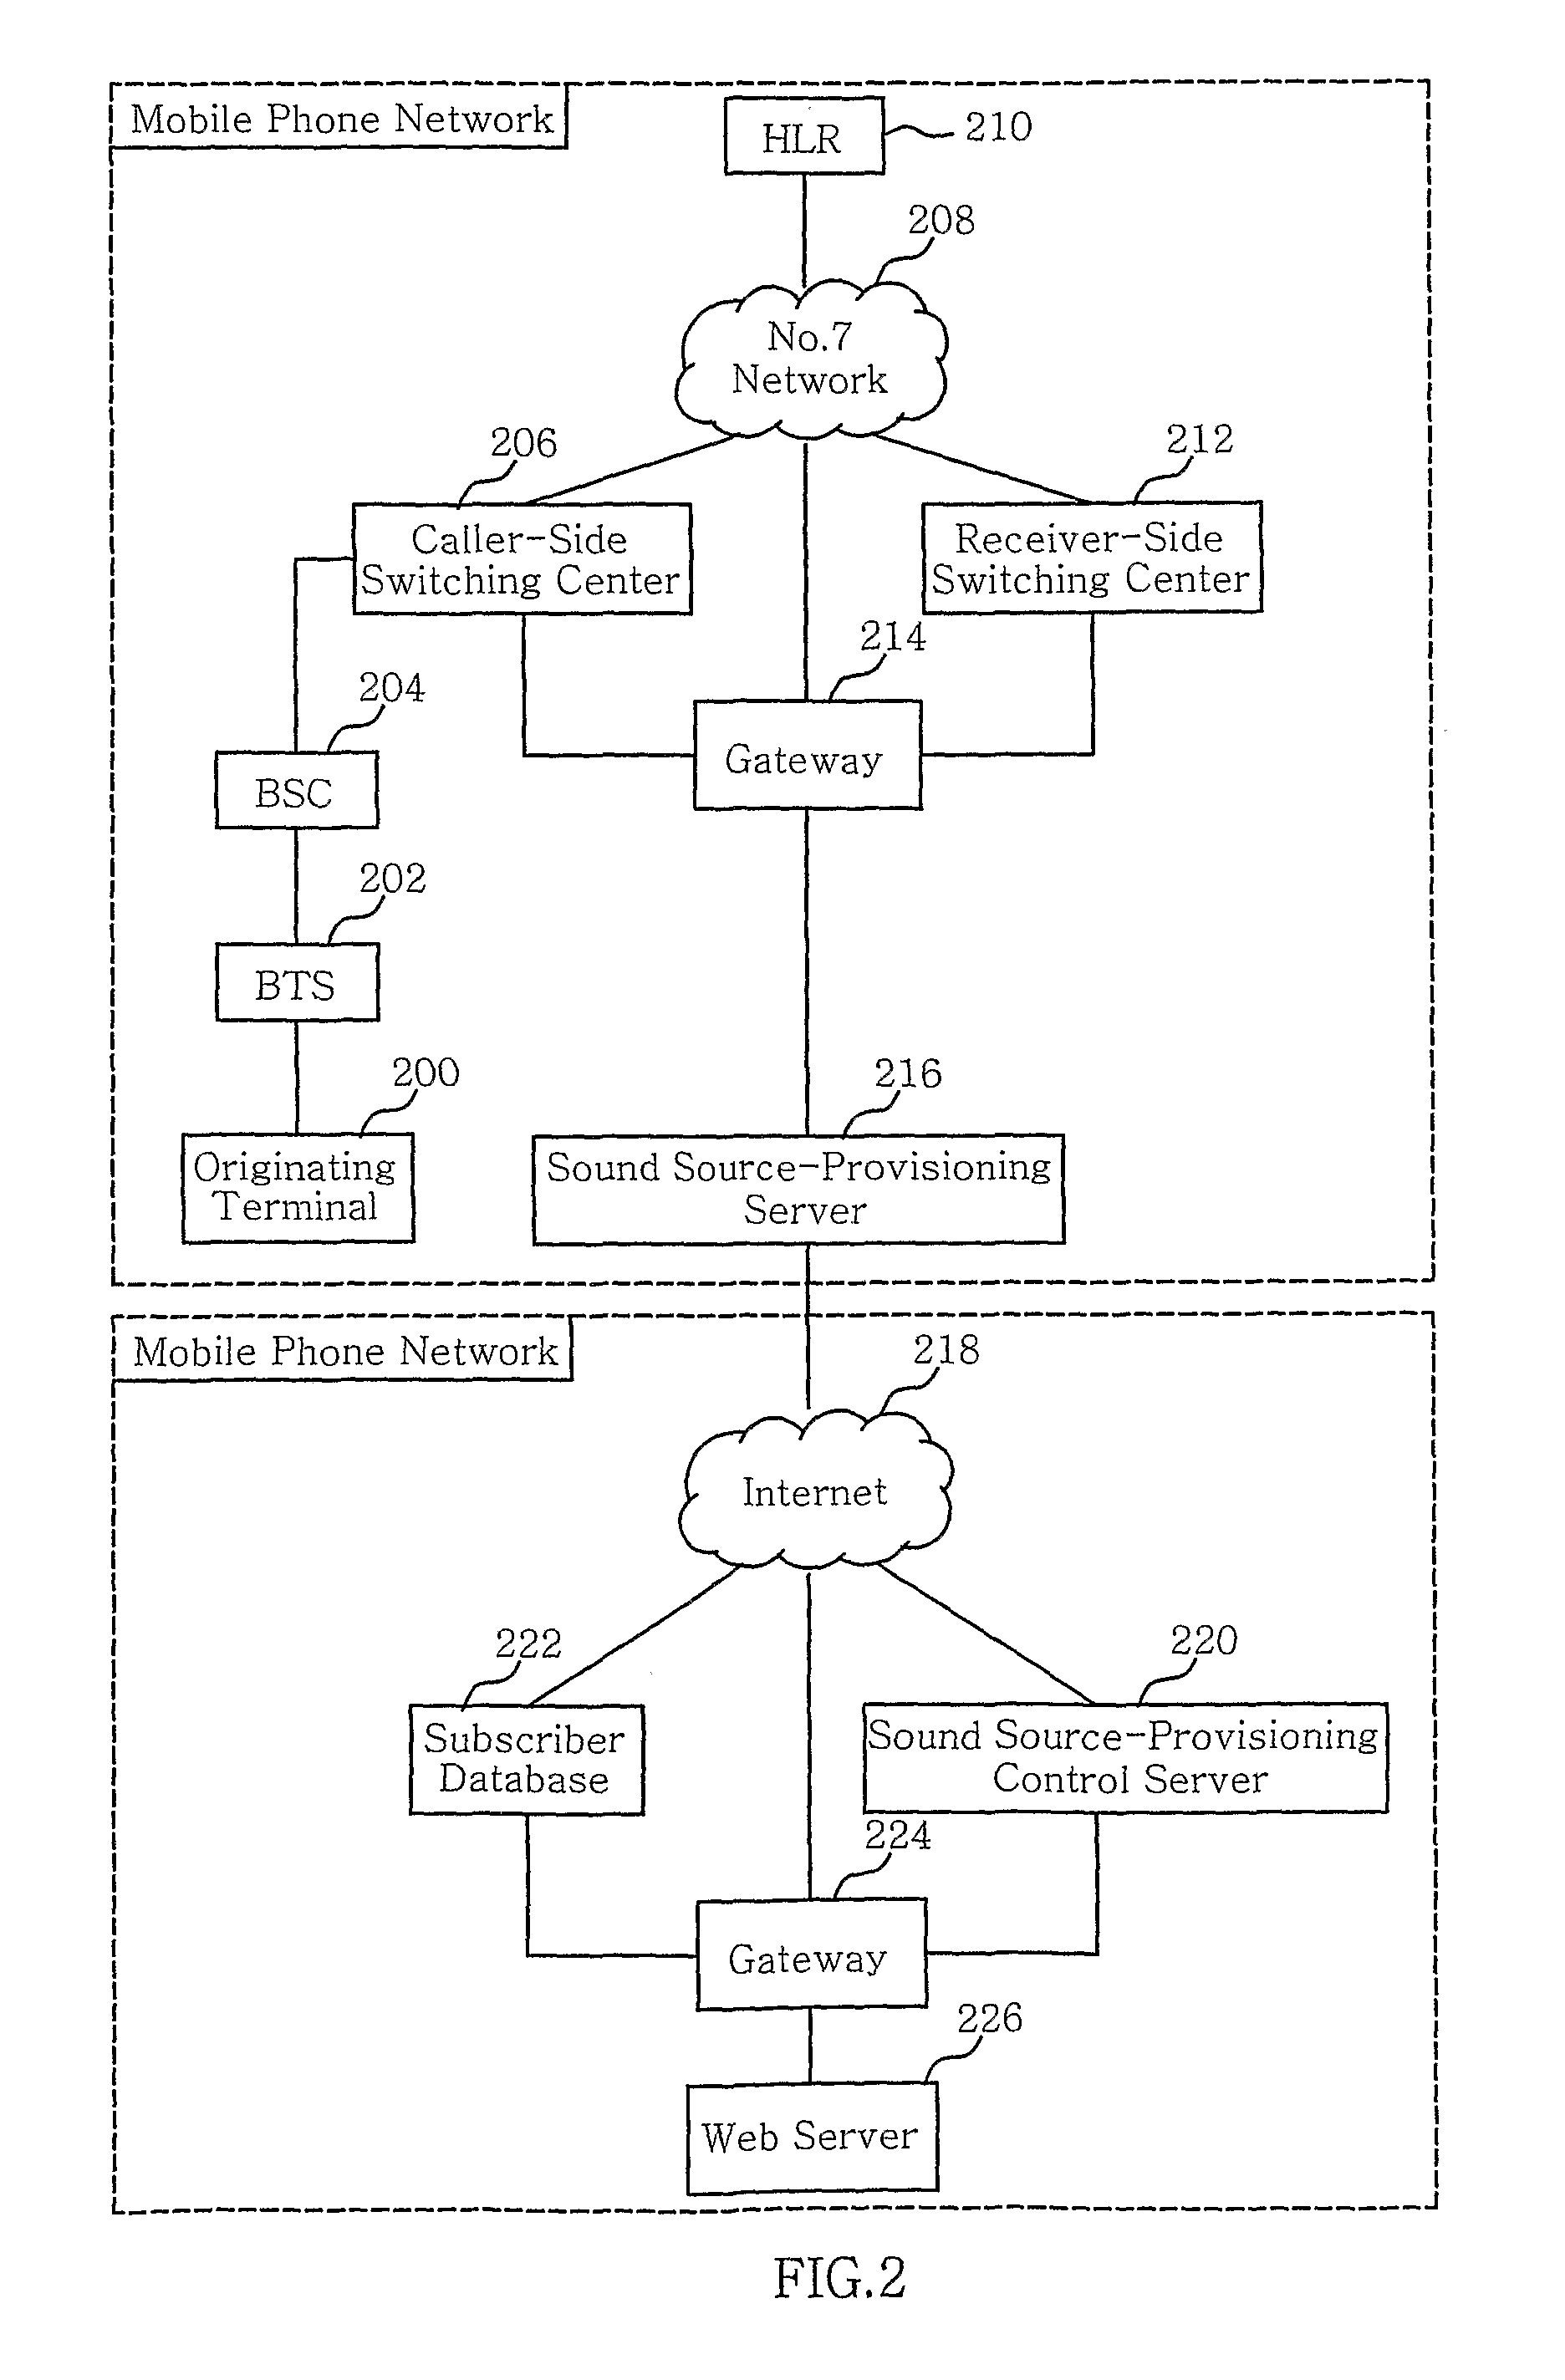 Terminal for Multimedia Ring Back Tone Service and Metnod for Controlling Terminal